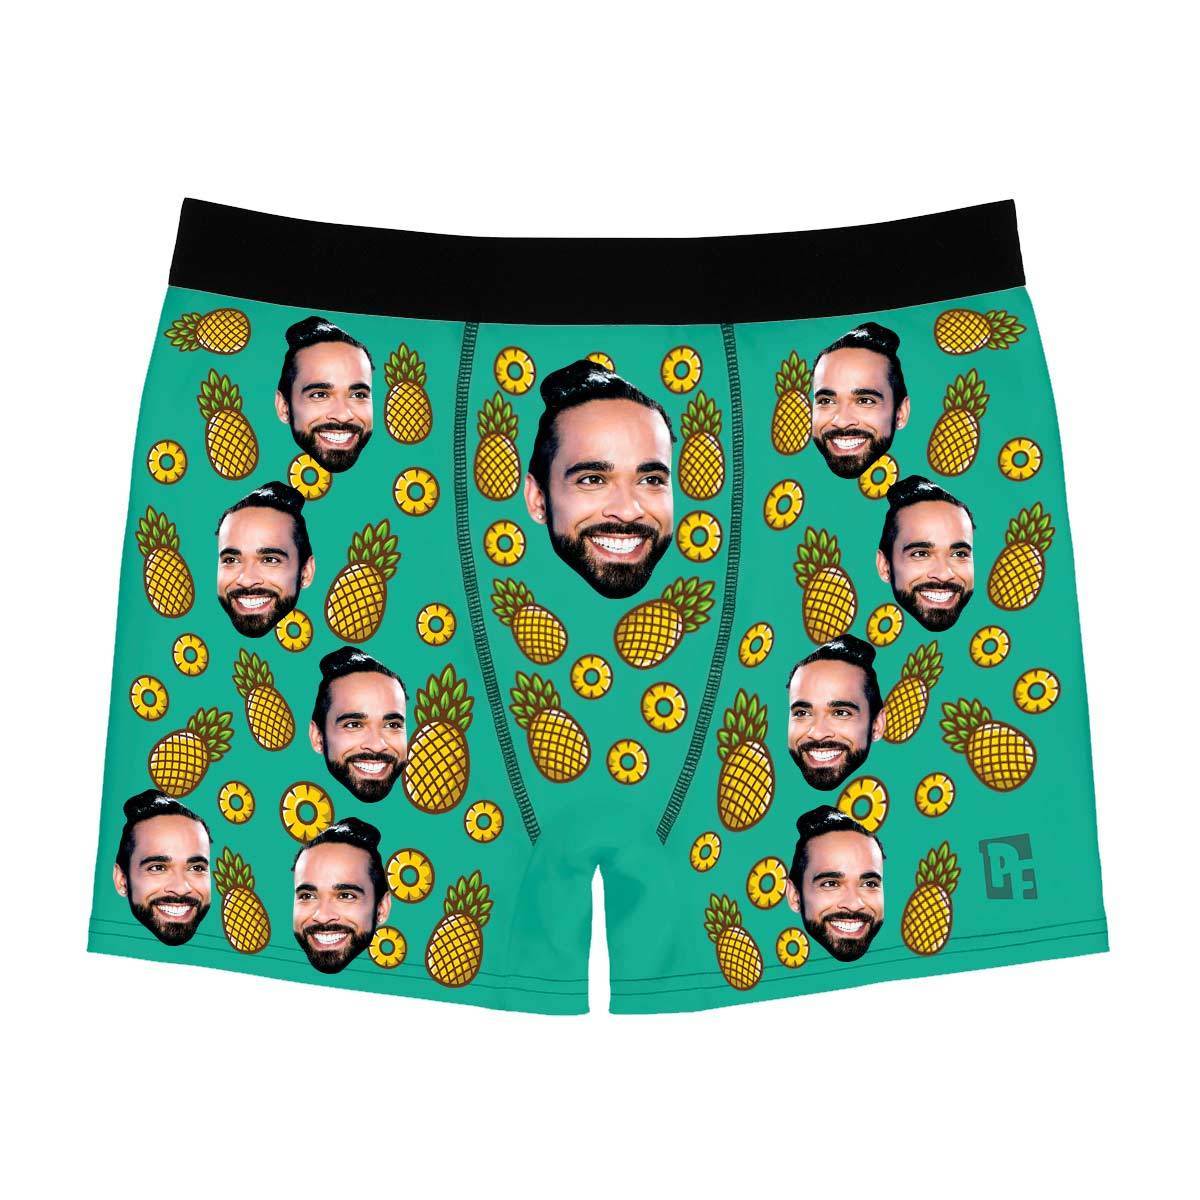 Mint Fruits men's boxer briefs personalized with photo printed on them